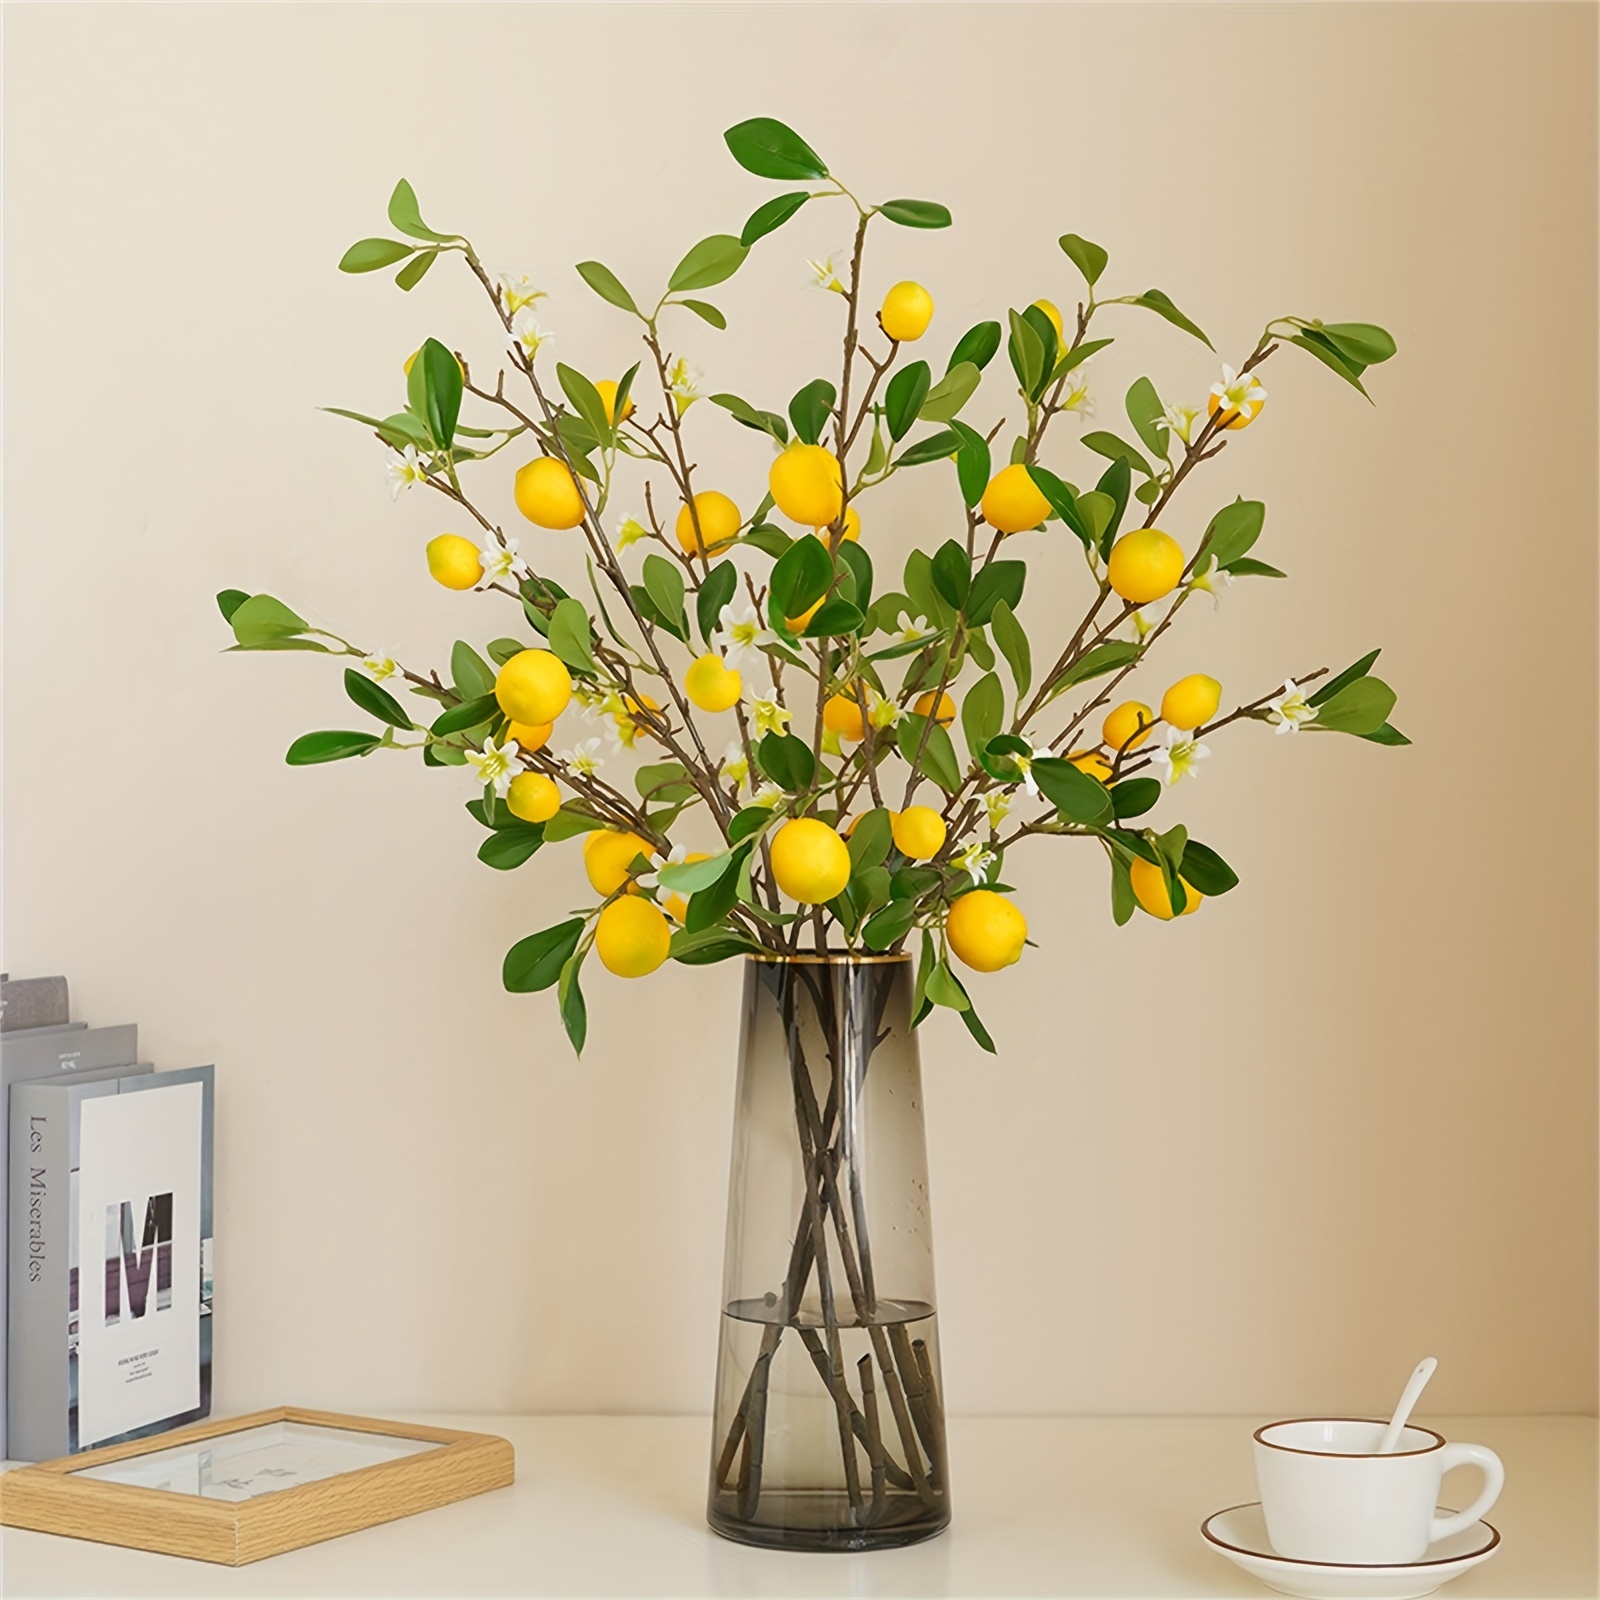 

Artificial Lemon Branches Decor Set - Plastic Faux Fruit Tree Twigs For Diy Vase Filler, Home Kitchen Table Centerpiece, Wedding & Party Decorations, Indoor Outdoor Farmhouse Display, 14+ Age Group